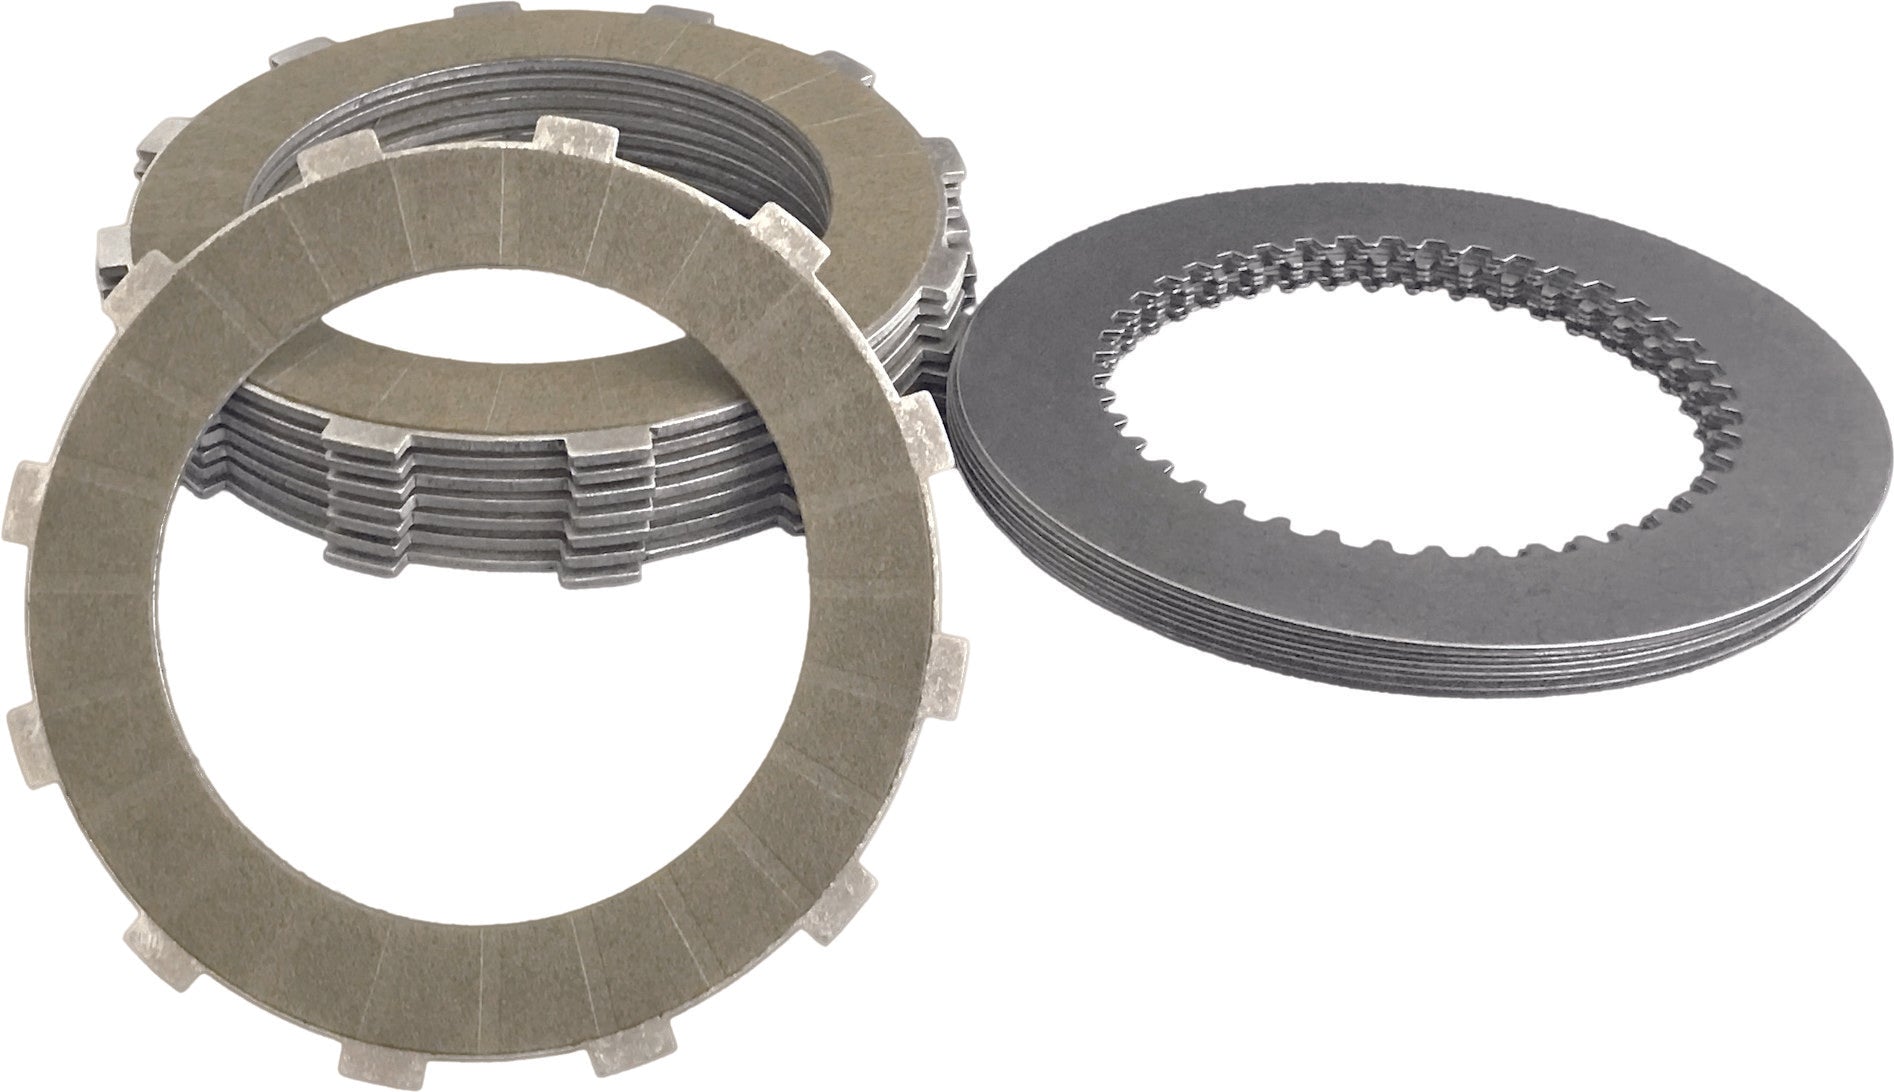 ENERGY ONE, ENERGY ONE E1 CLUTCH KIT FOR RIVERA PRO 98-06 RP-0013